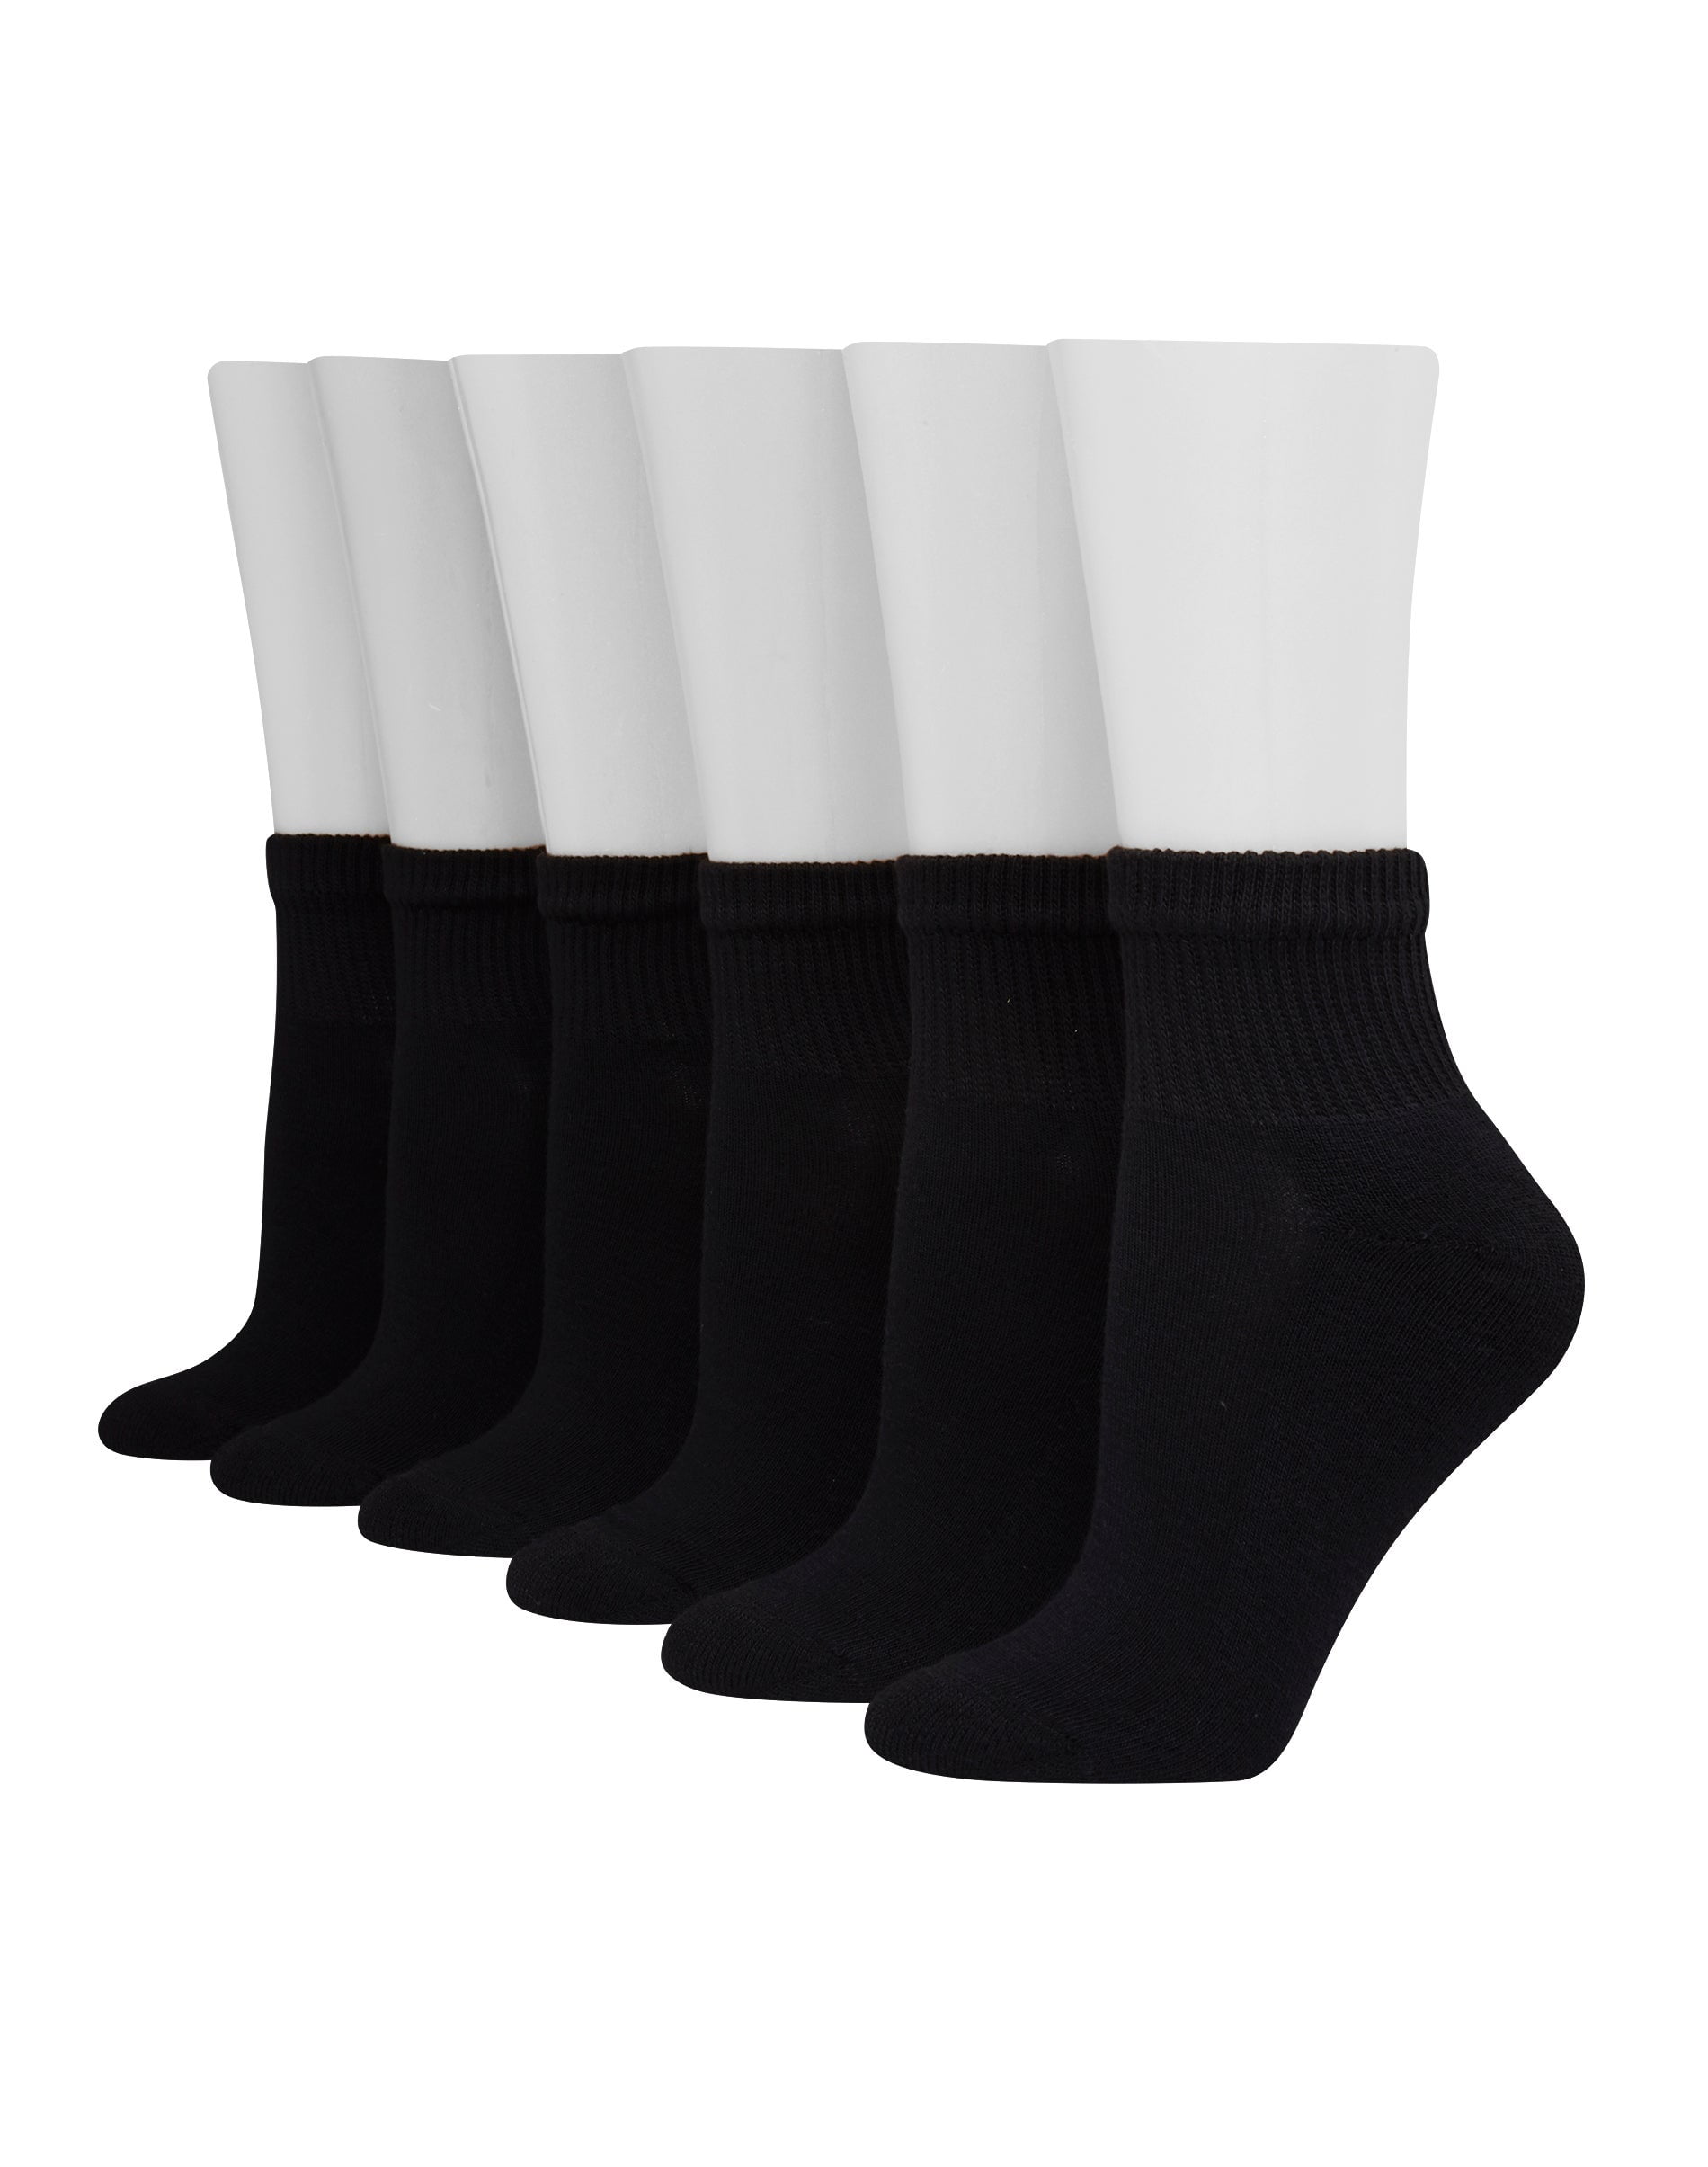 Hanes Ultimate Women's Ankle Socks, Cushioned, 6-Pairs Black 9-11 ...